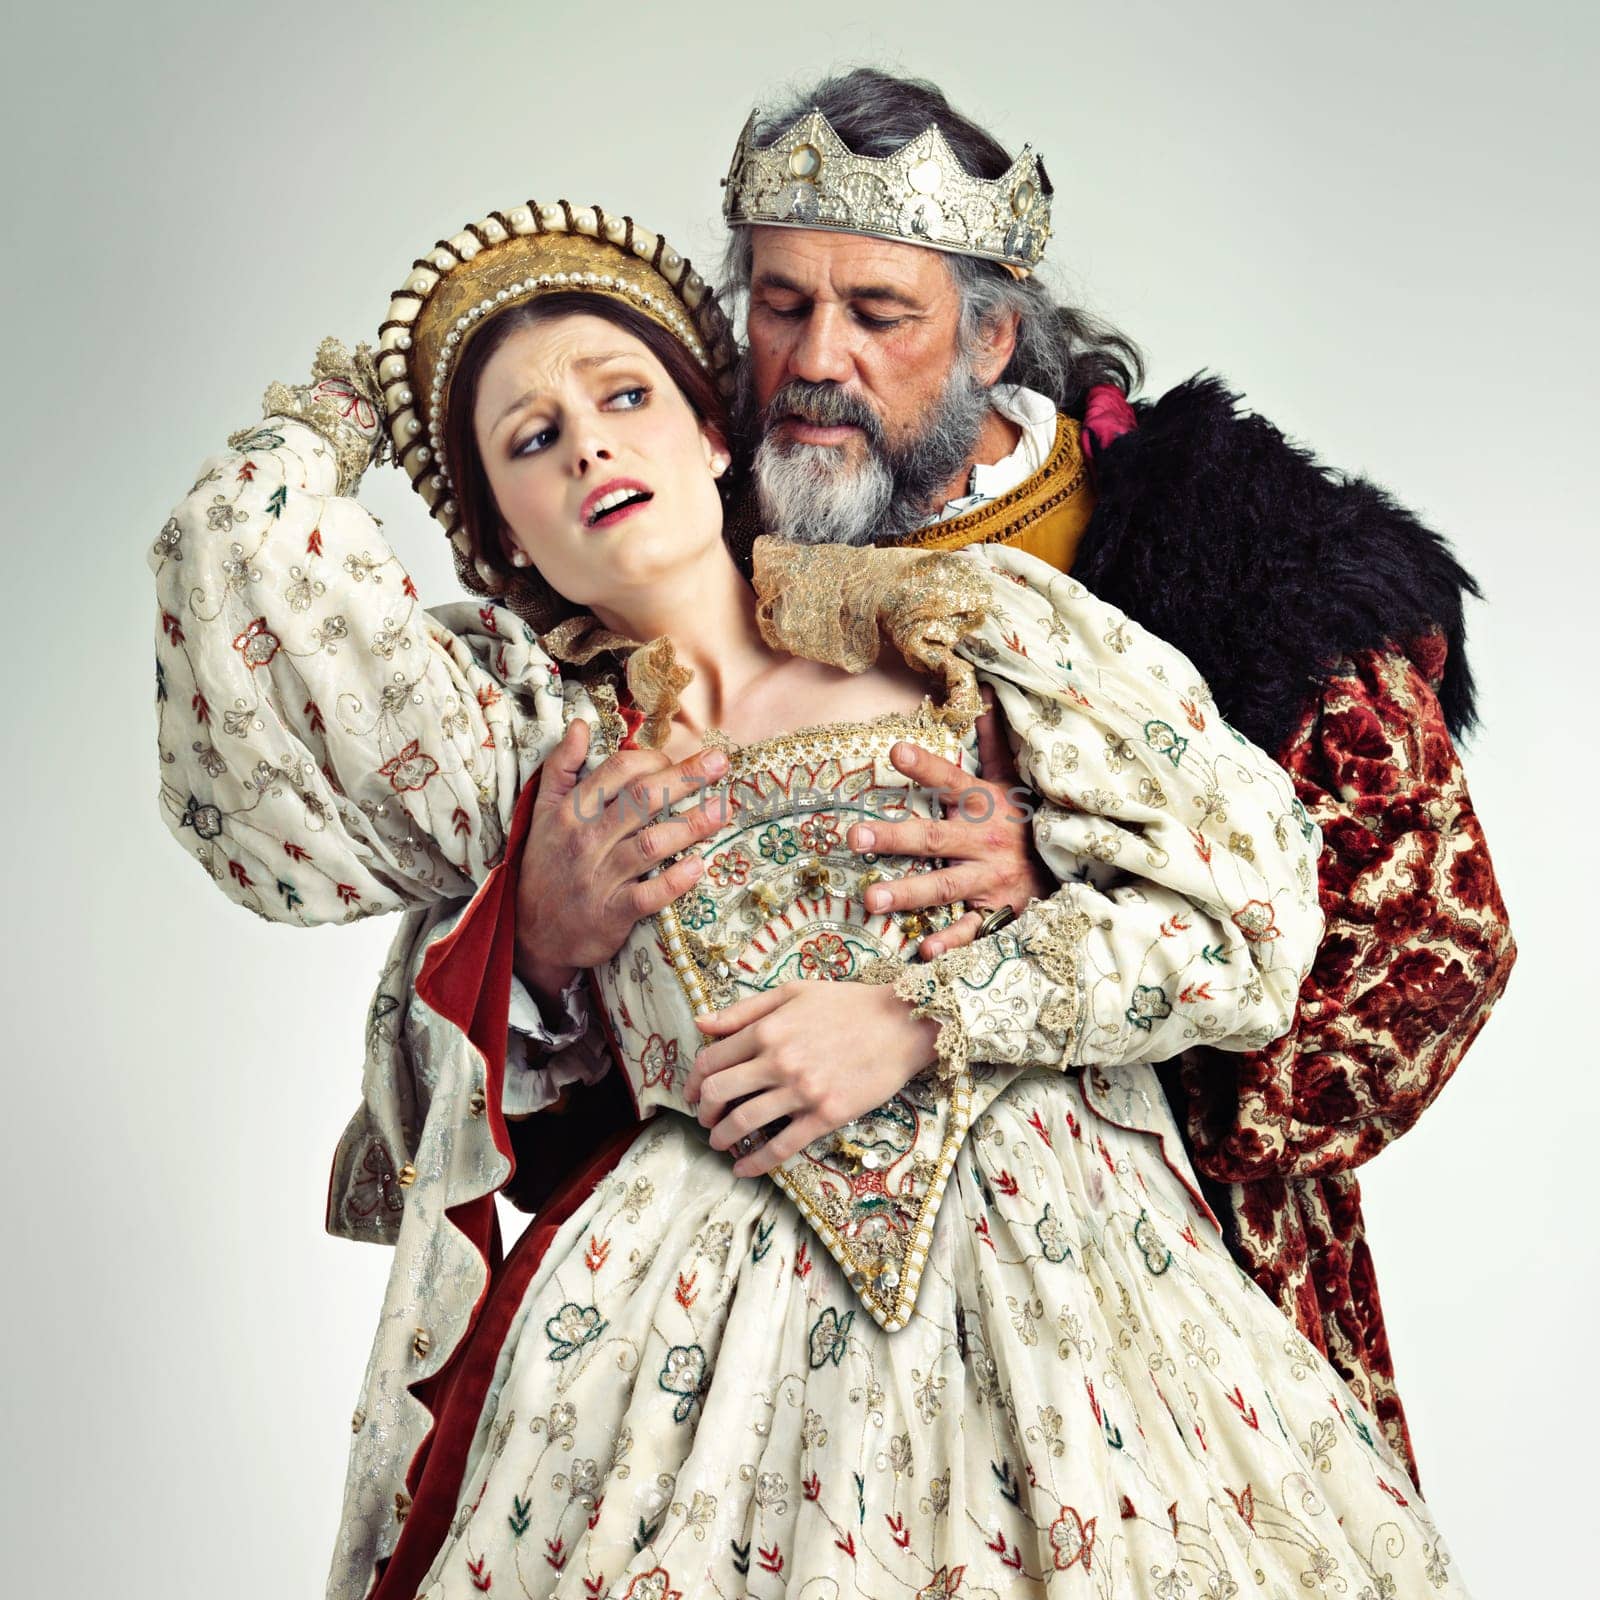 Theater, king and queen in costume with violence in in crown and renaissance clothes in studio. Art, cosplay and larp, couple in medieval play, royal history character and woman in distress with man